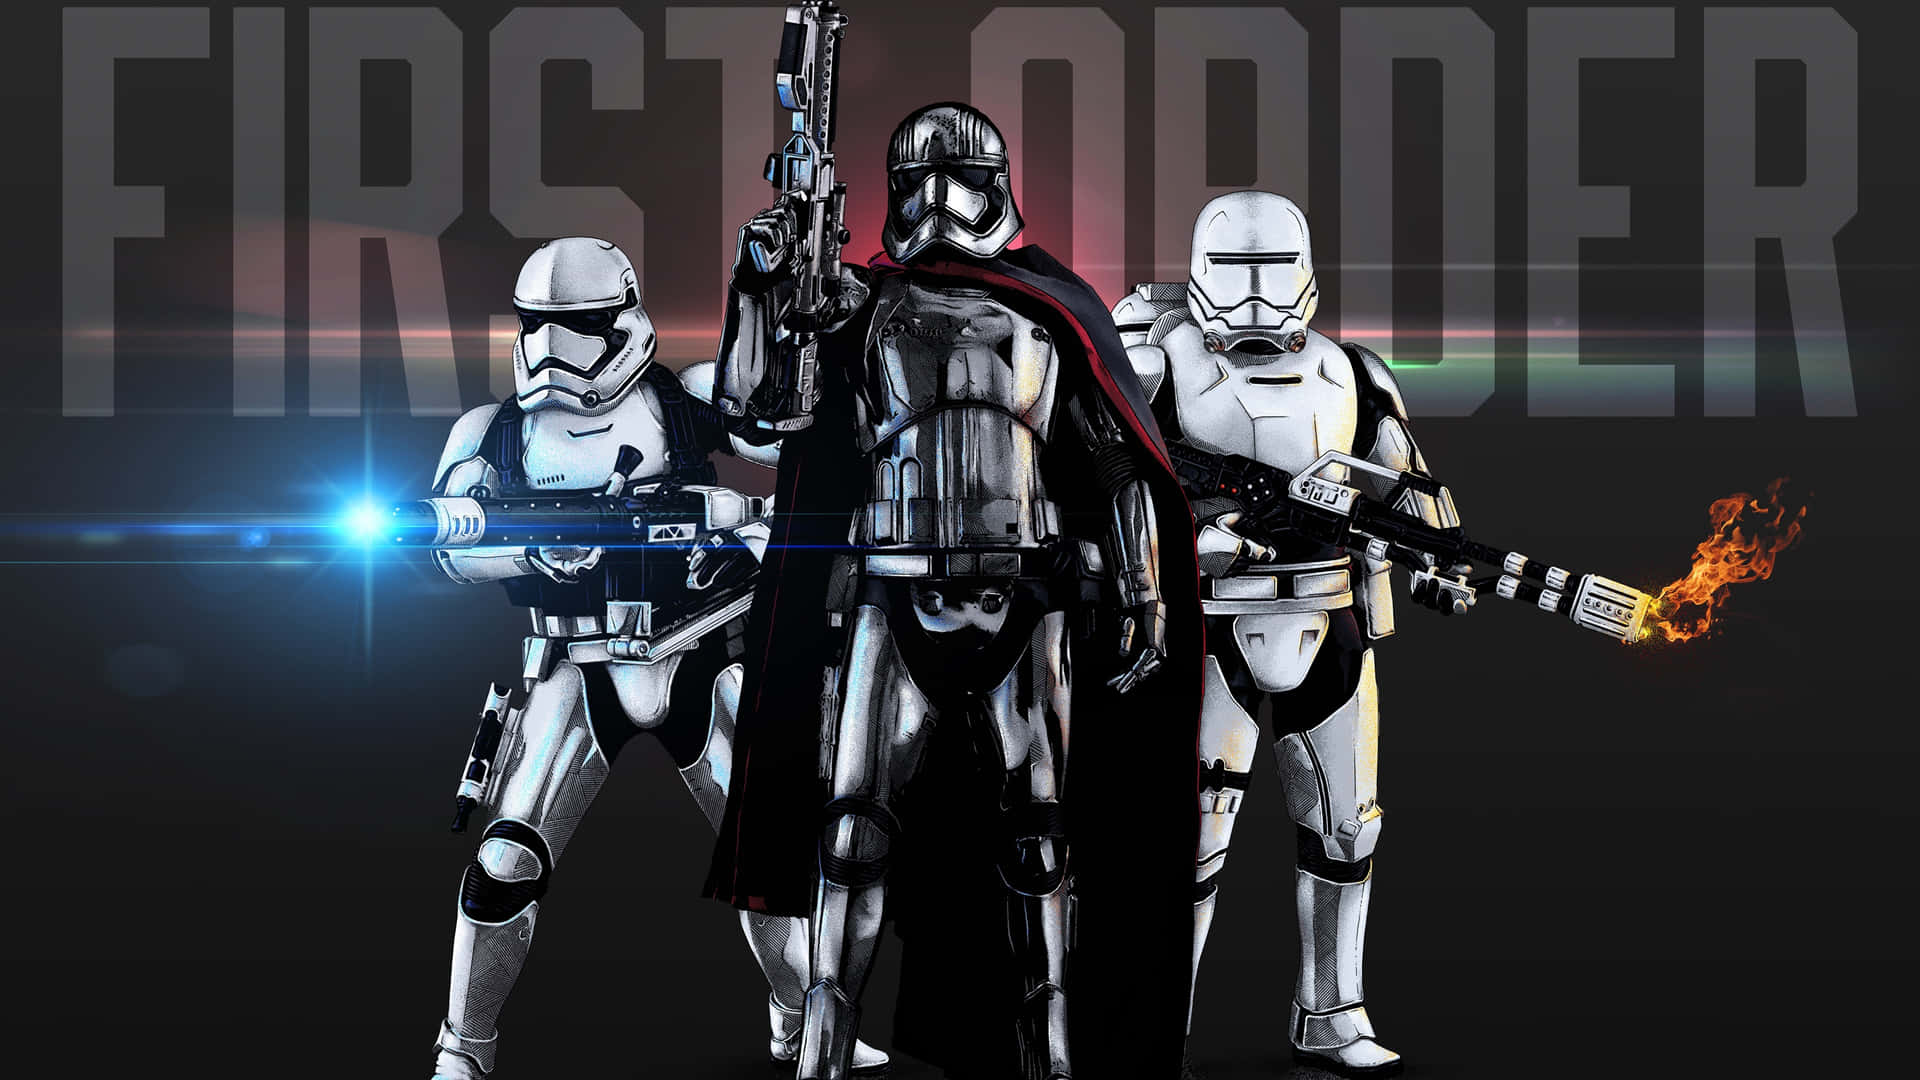 A group of First Order soldiers on battle-ready stance in an intense scene Wallpaper